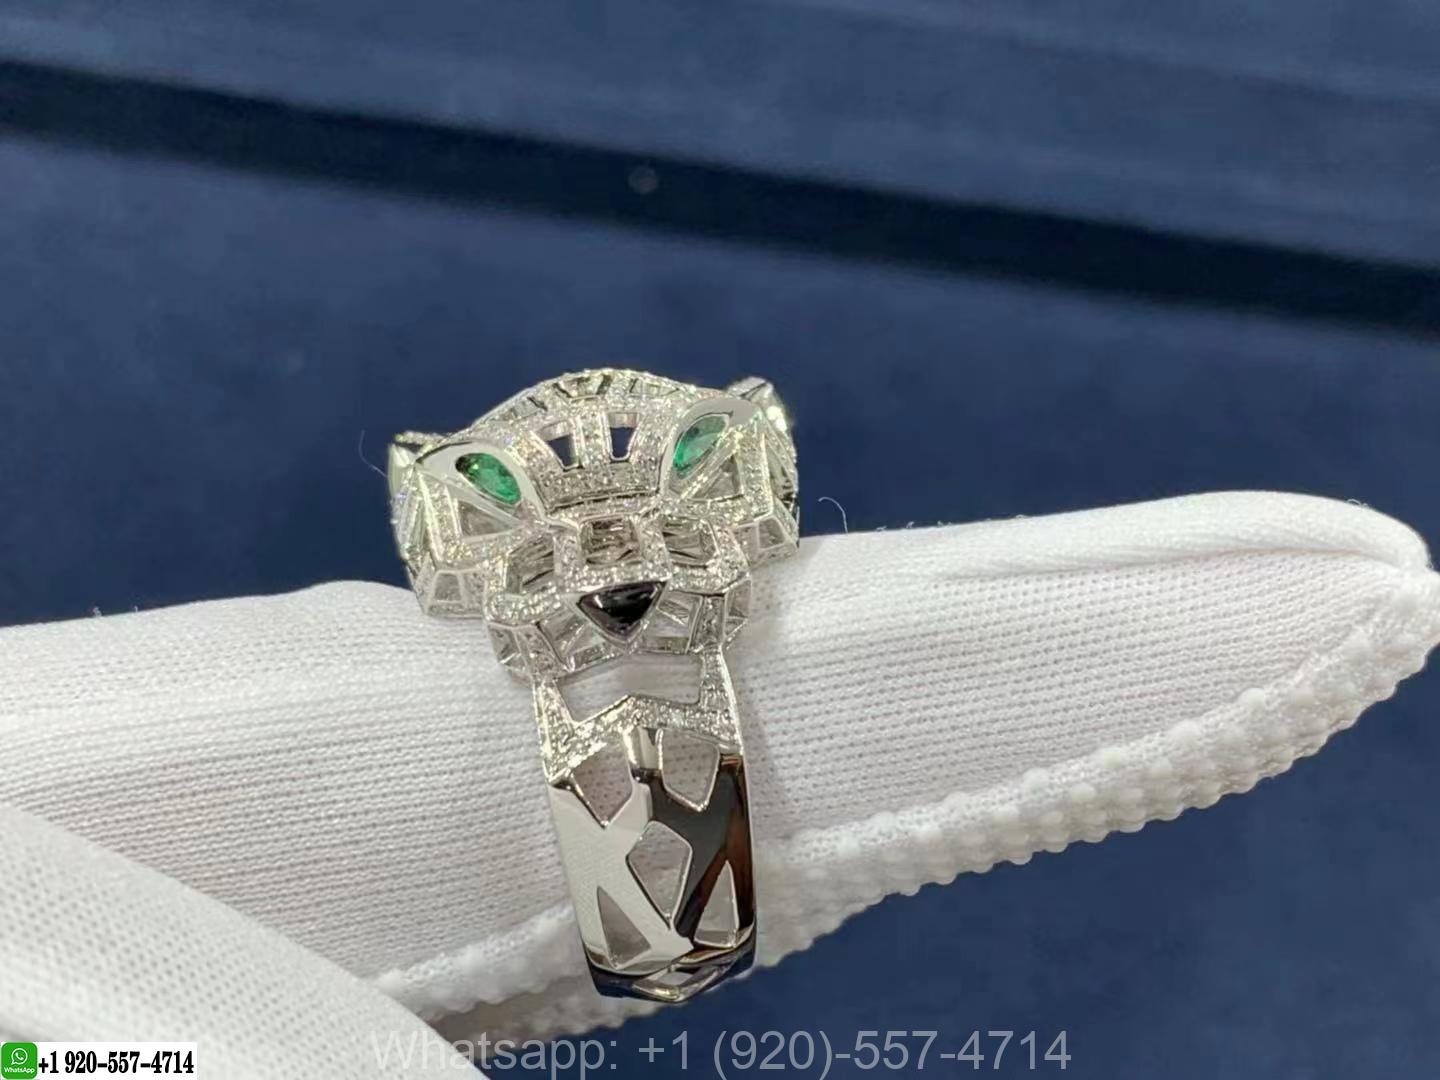 Panthere de Cartier 18k White Gold Diamond Pave Onyx Emerald Ring N4768000